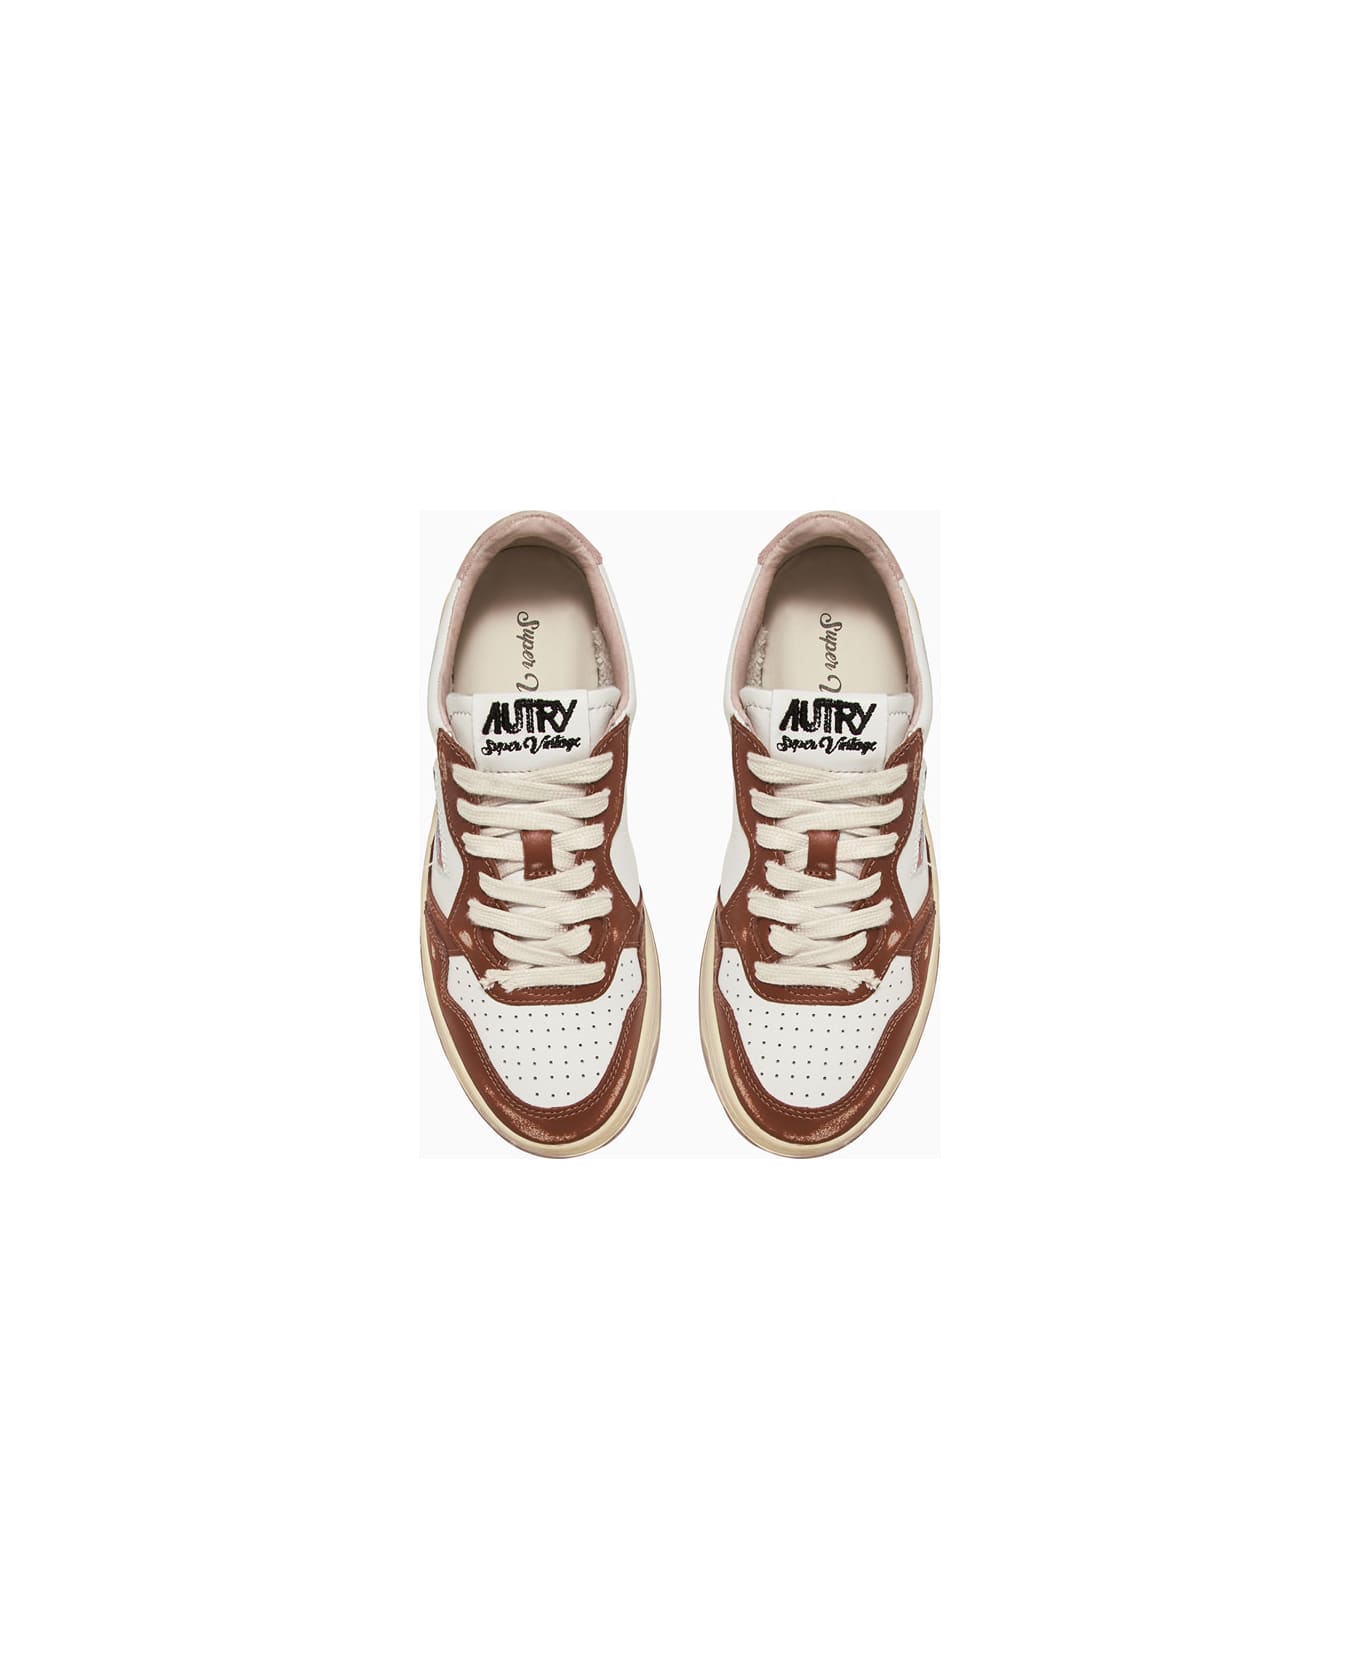 Autry Super Vintage Low Sneakers Avlw Cl01 - WHITE/Brown スニーカー